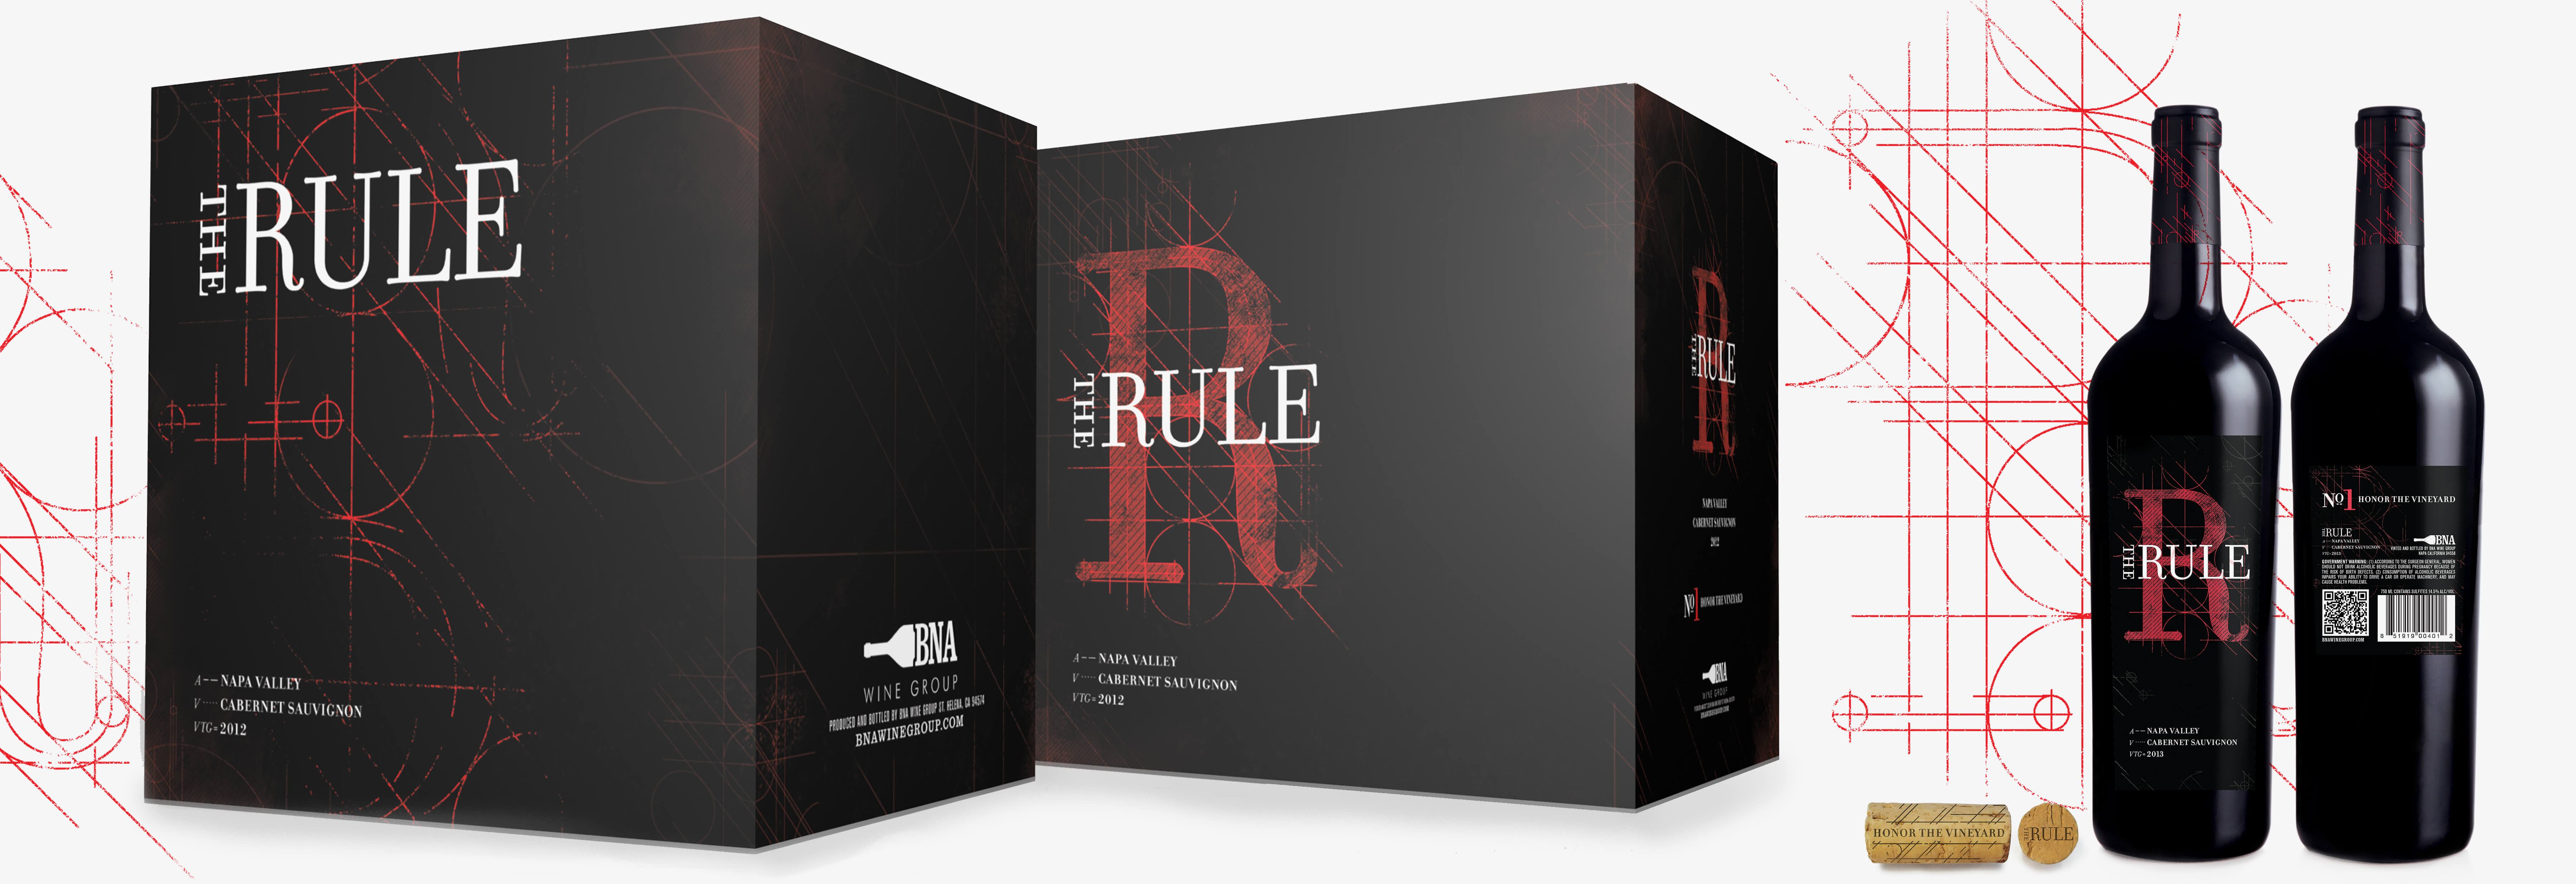 Box and bottle packaging design for The Rule cab sav, BNA Wine Group, Napa, California